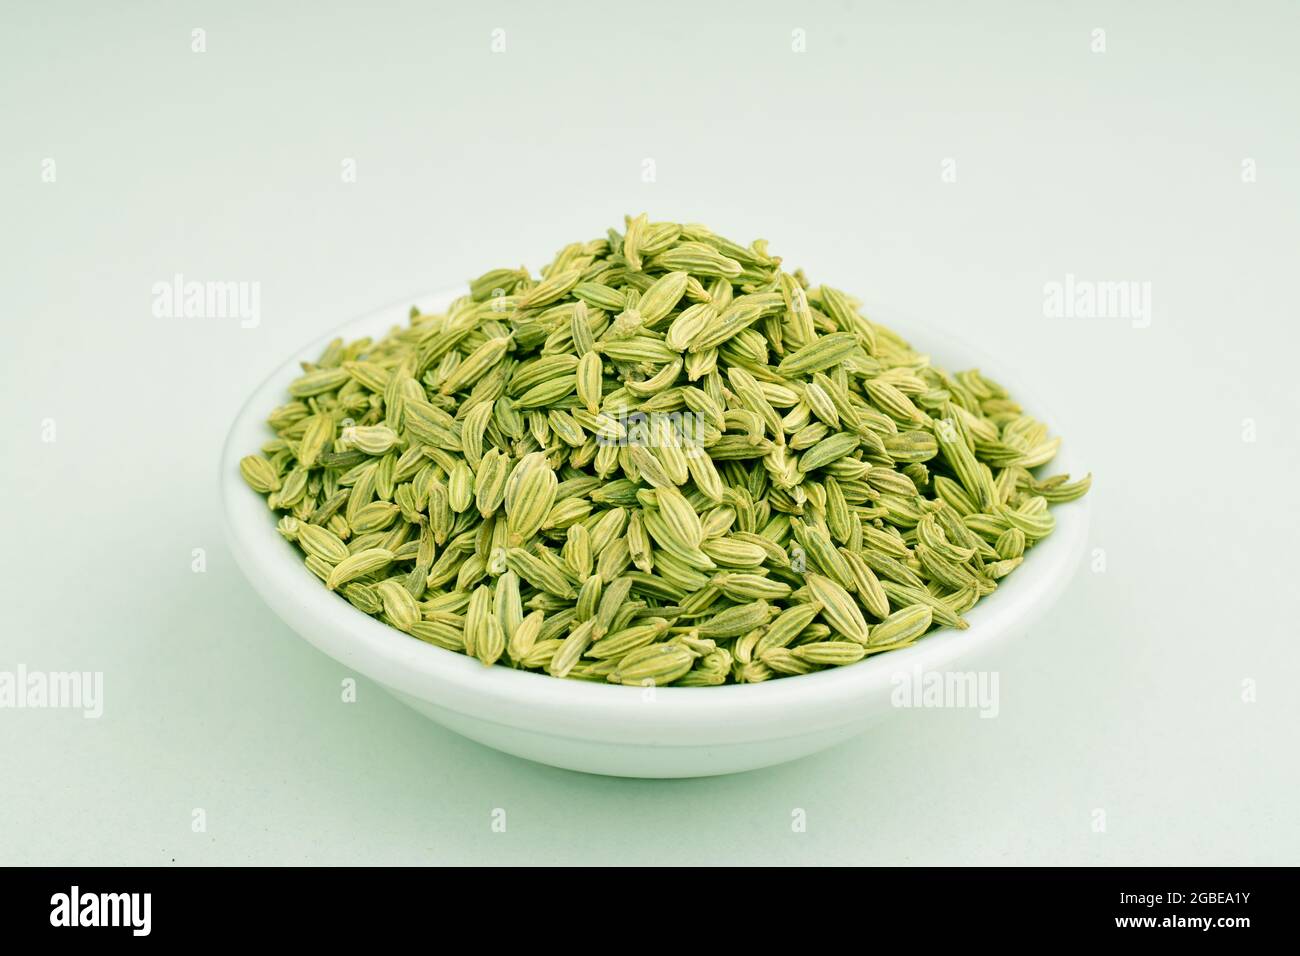 Fennel Seeds In Bowl Over White Background Stock Photo